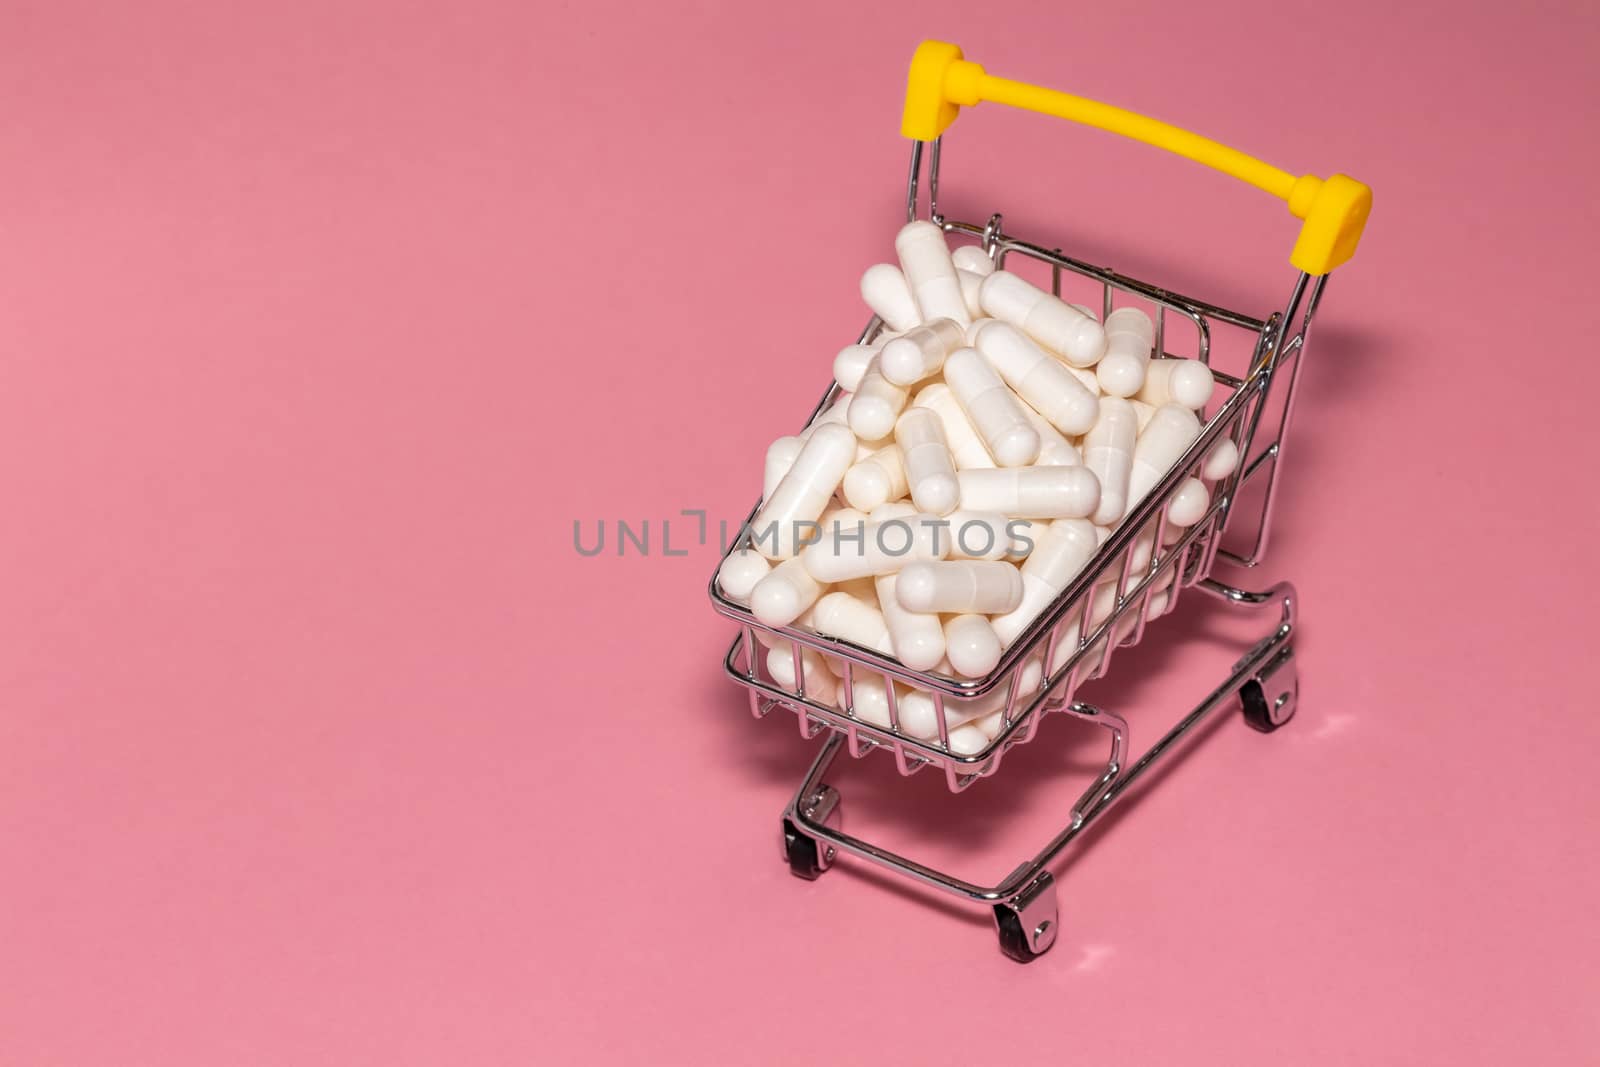 High angle shot of a small shopping cart full of white pills. Pink background, copy space. Shopping online, buying medicine, pharmaceutical business concepts.